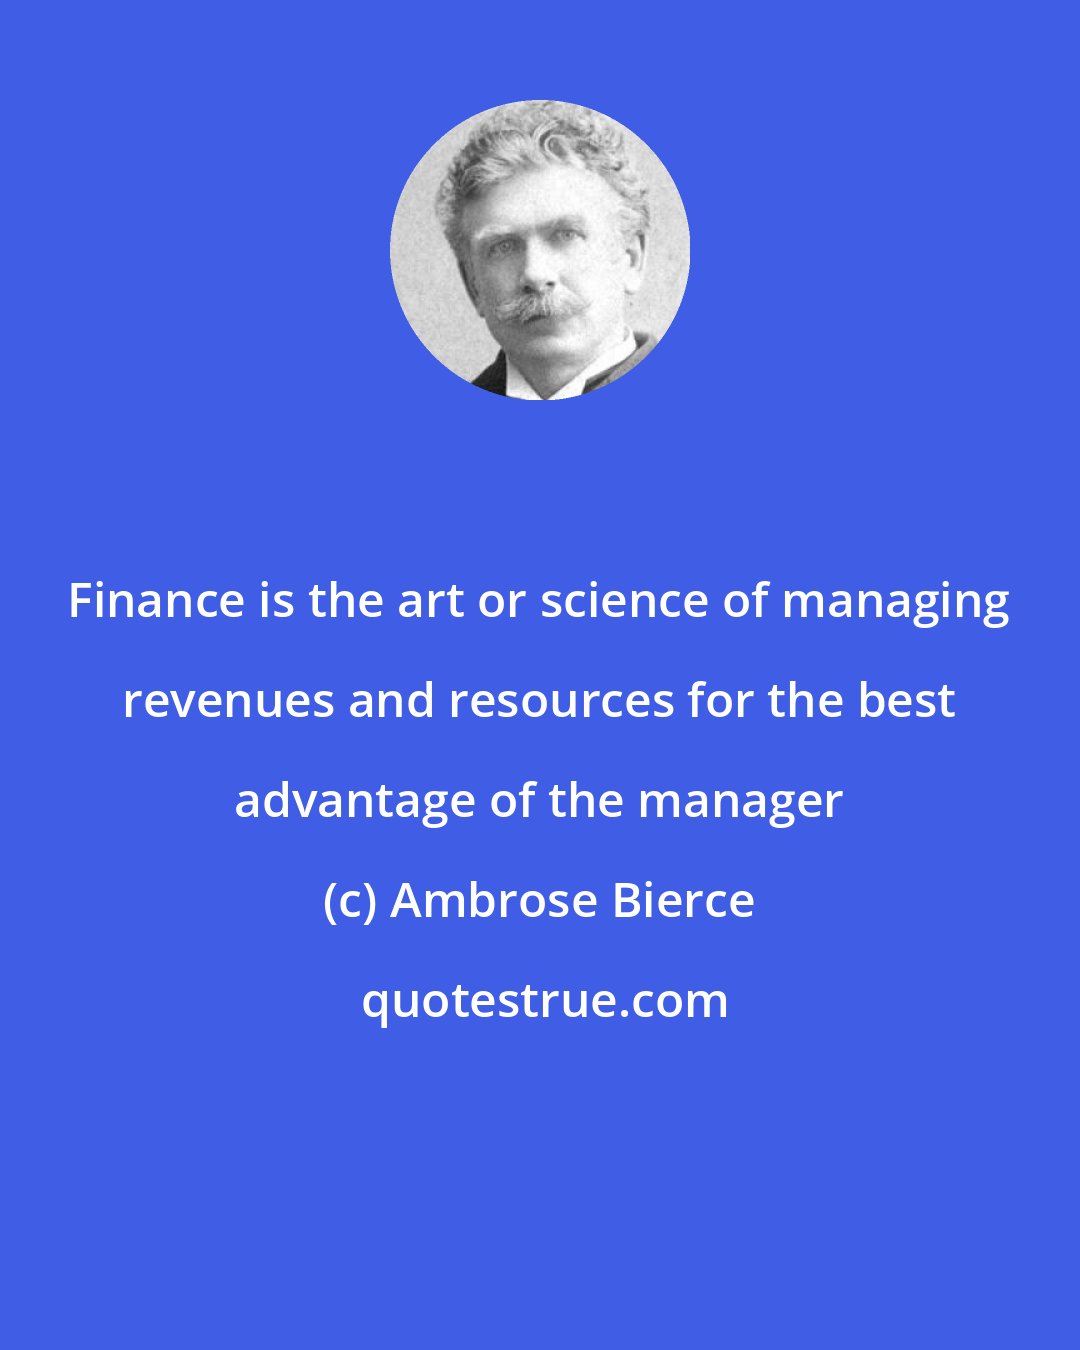 Ambrose Bierce: Finance is the art or science of managing revenues and resources for the best advantage of the manager